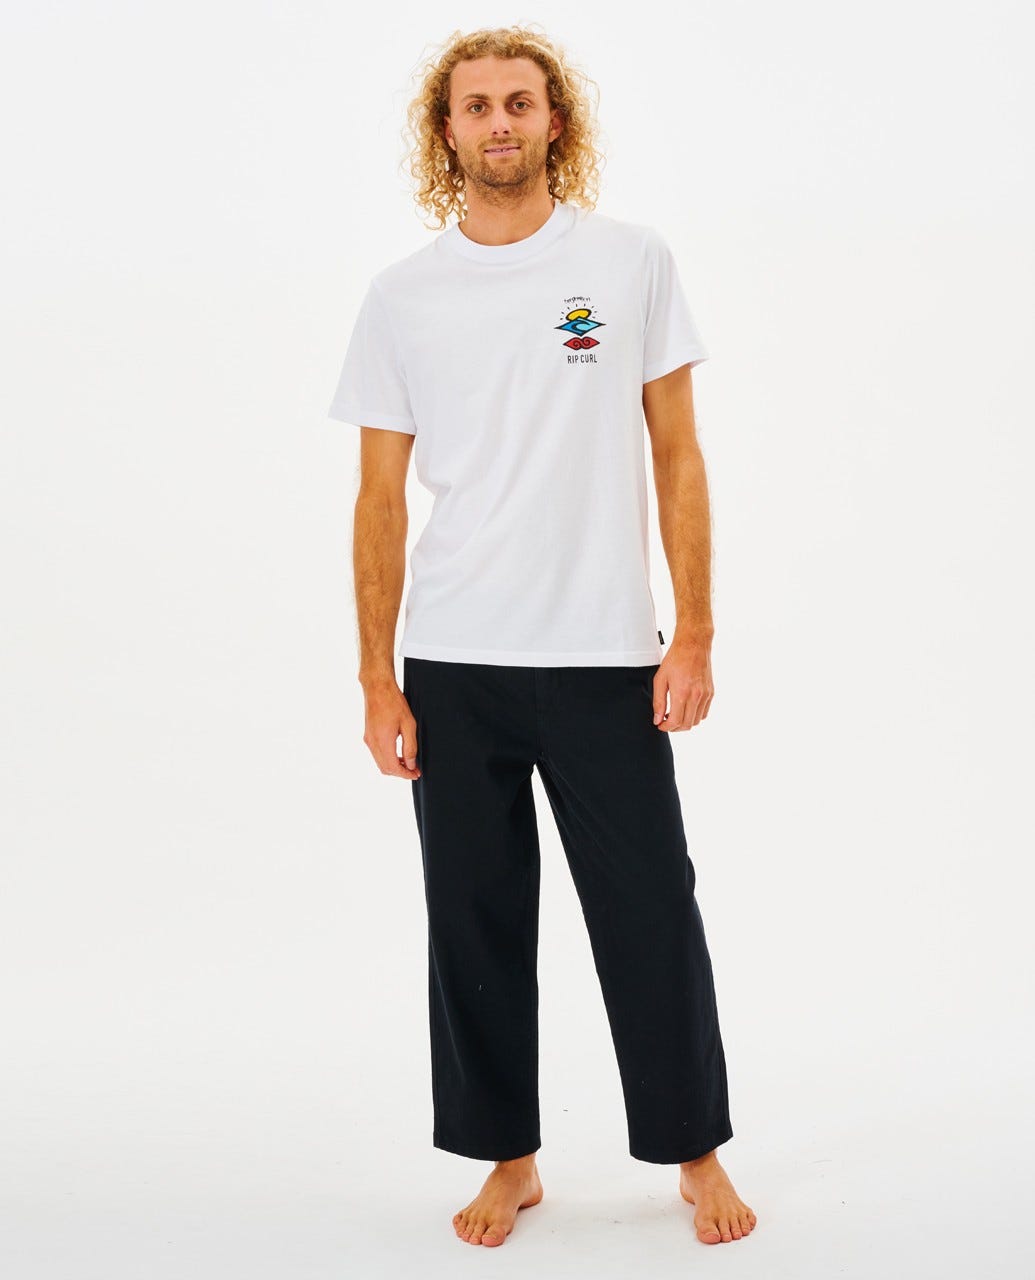 RIP CURL QUALITY SURF PRODUCTS 00CMPA-0090 PANT (M)